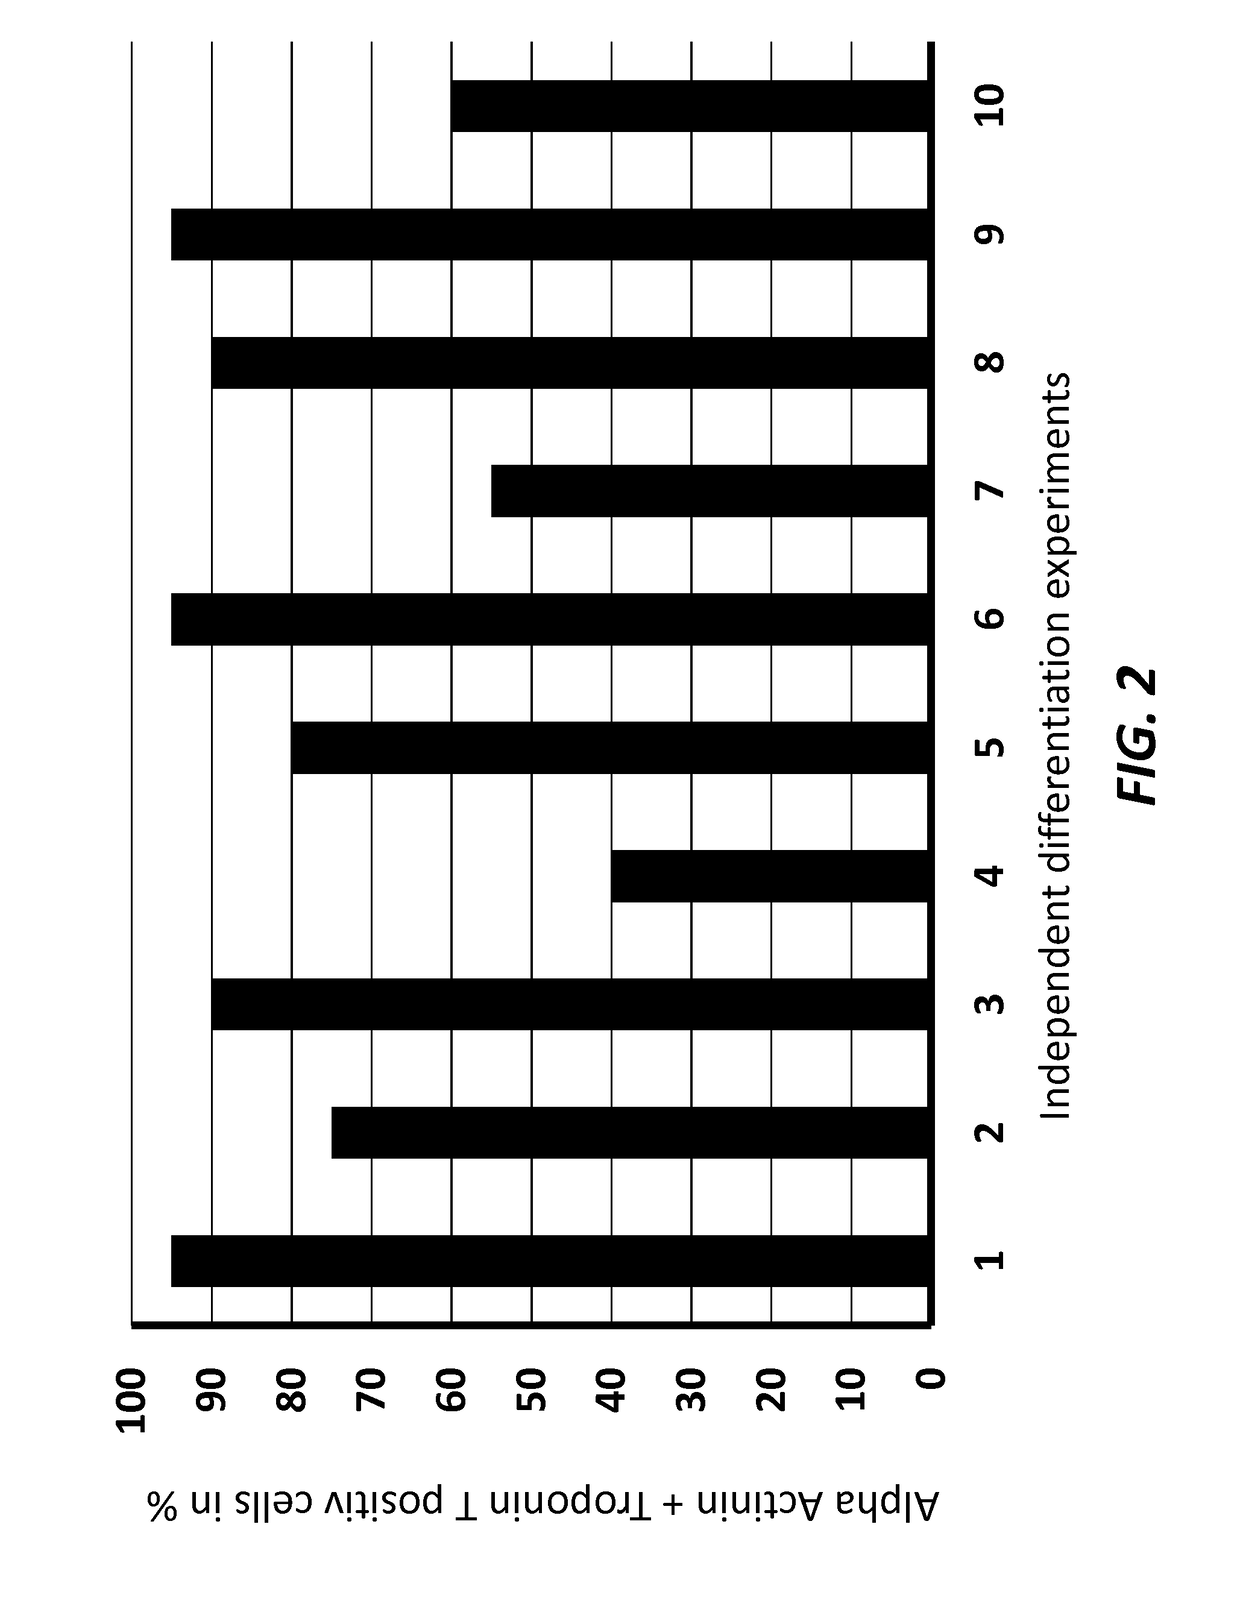 Method for differentiation of pluripotent stem cells into cardiomyocytes